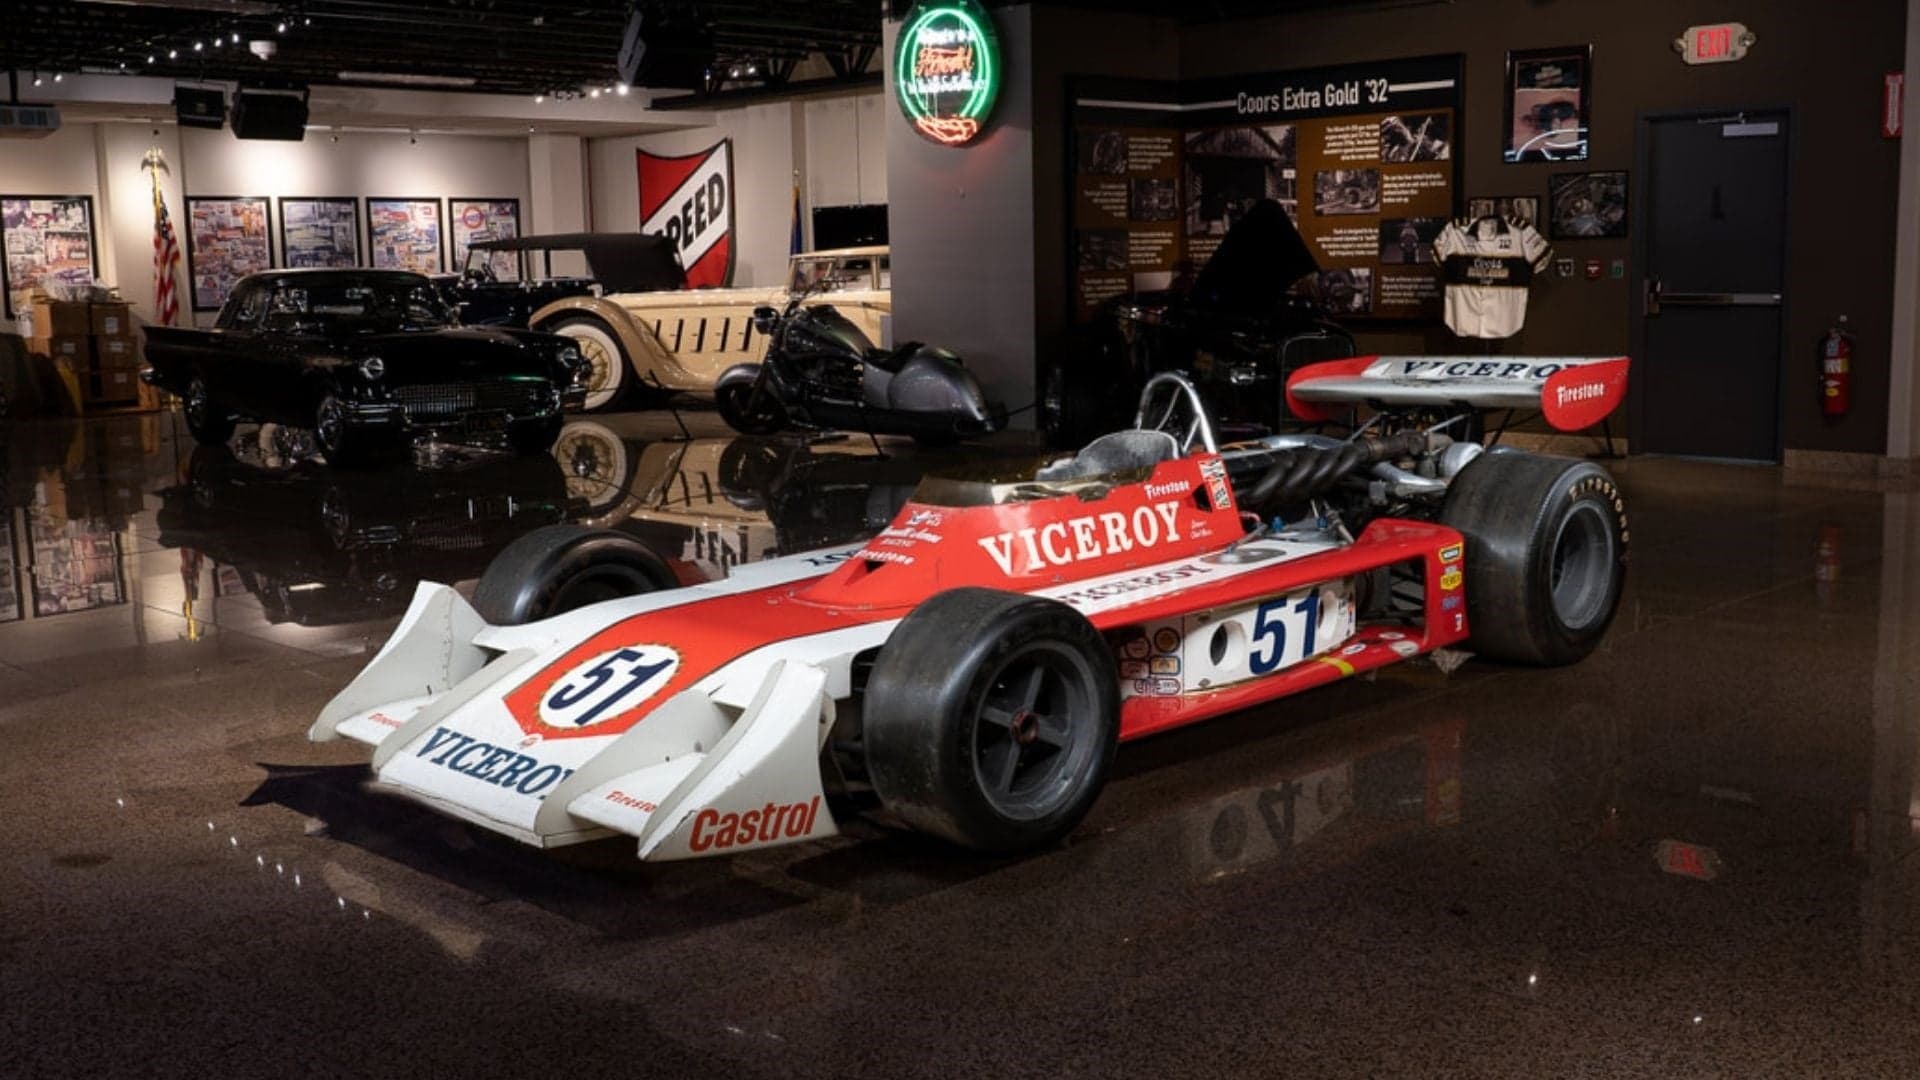 Jan Opperman’s VPJ-2 IndyCar Has a Colorful History Just Like Its Larger-Than-Life Driver